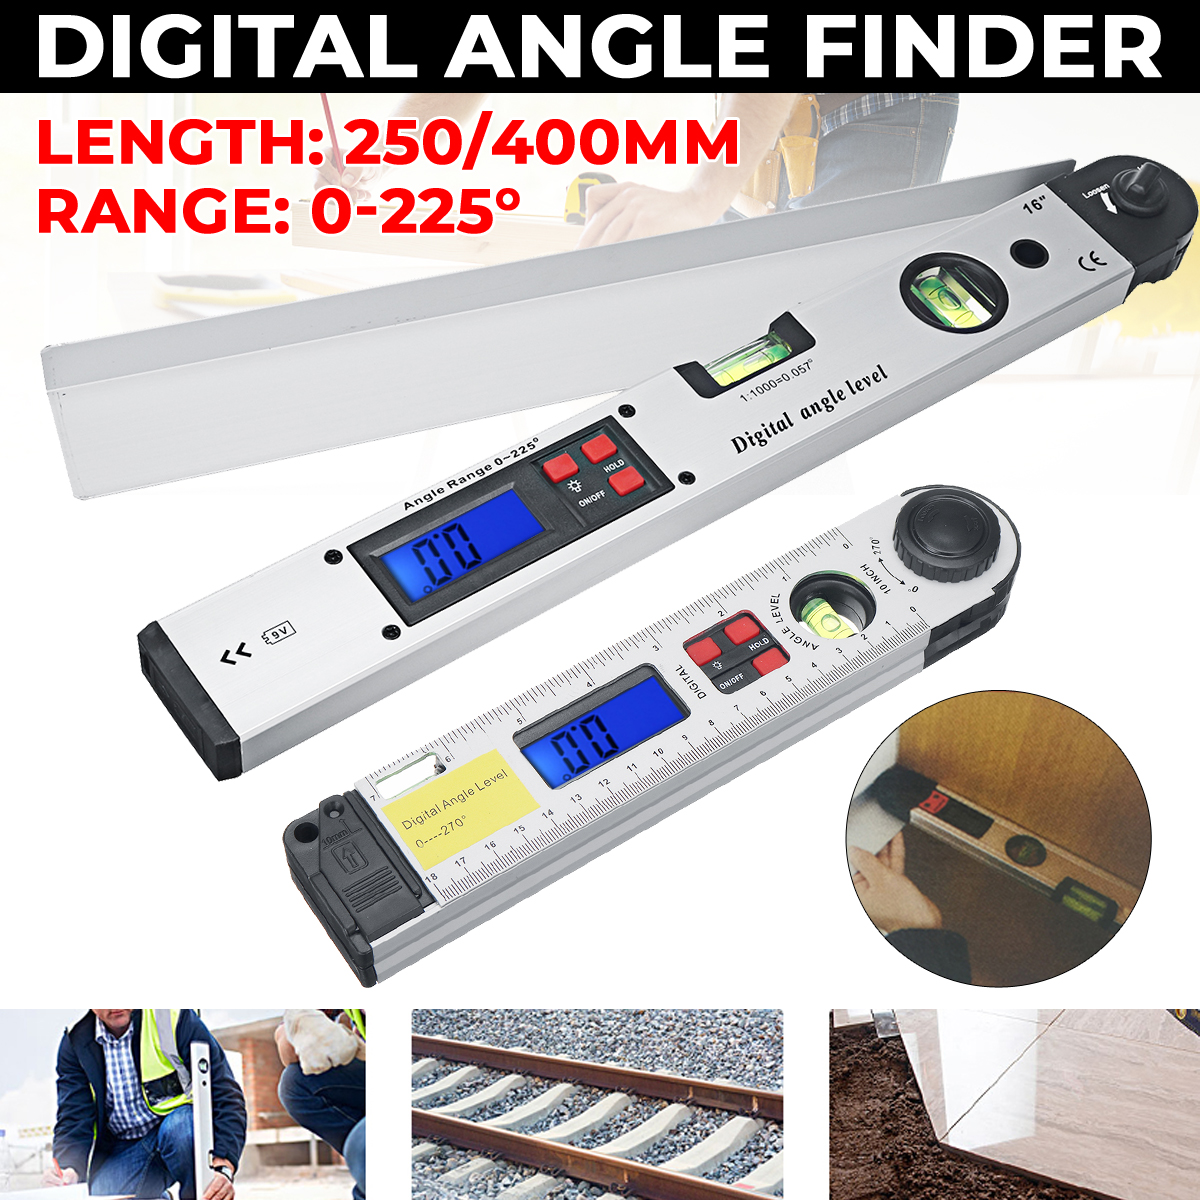 250400mm-Digital-Angle-Level-Meter-LCD-Display-0-225-Degree-for-Measuring-Roof-Angles-Fitting-Up-Win-1740234-1